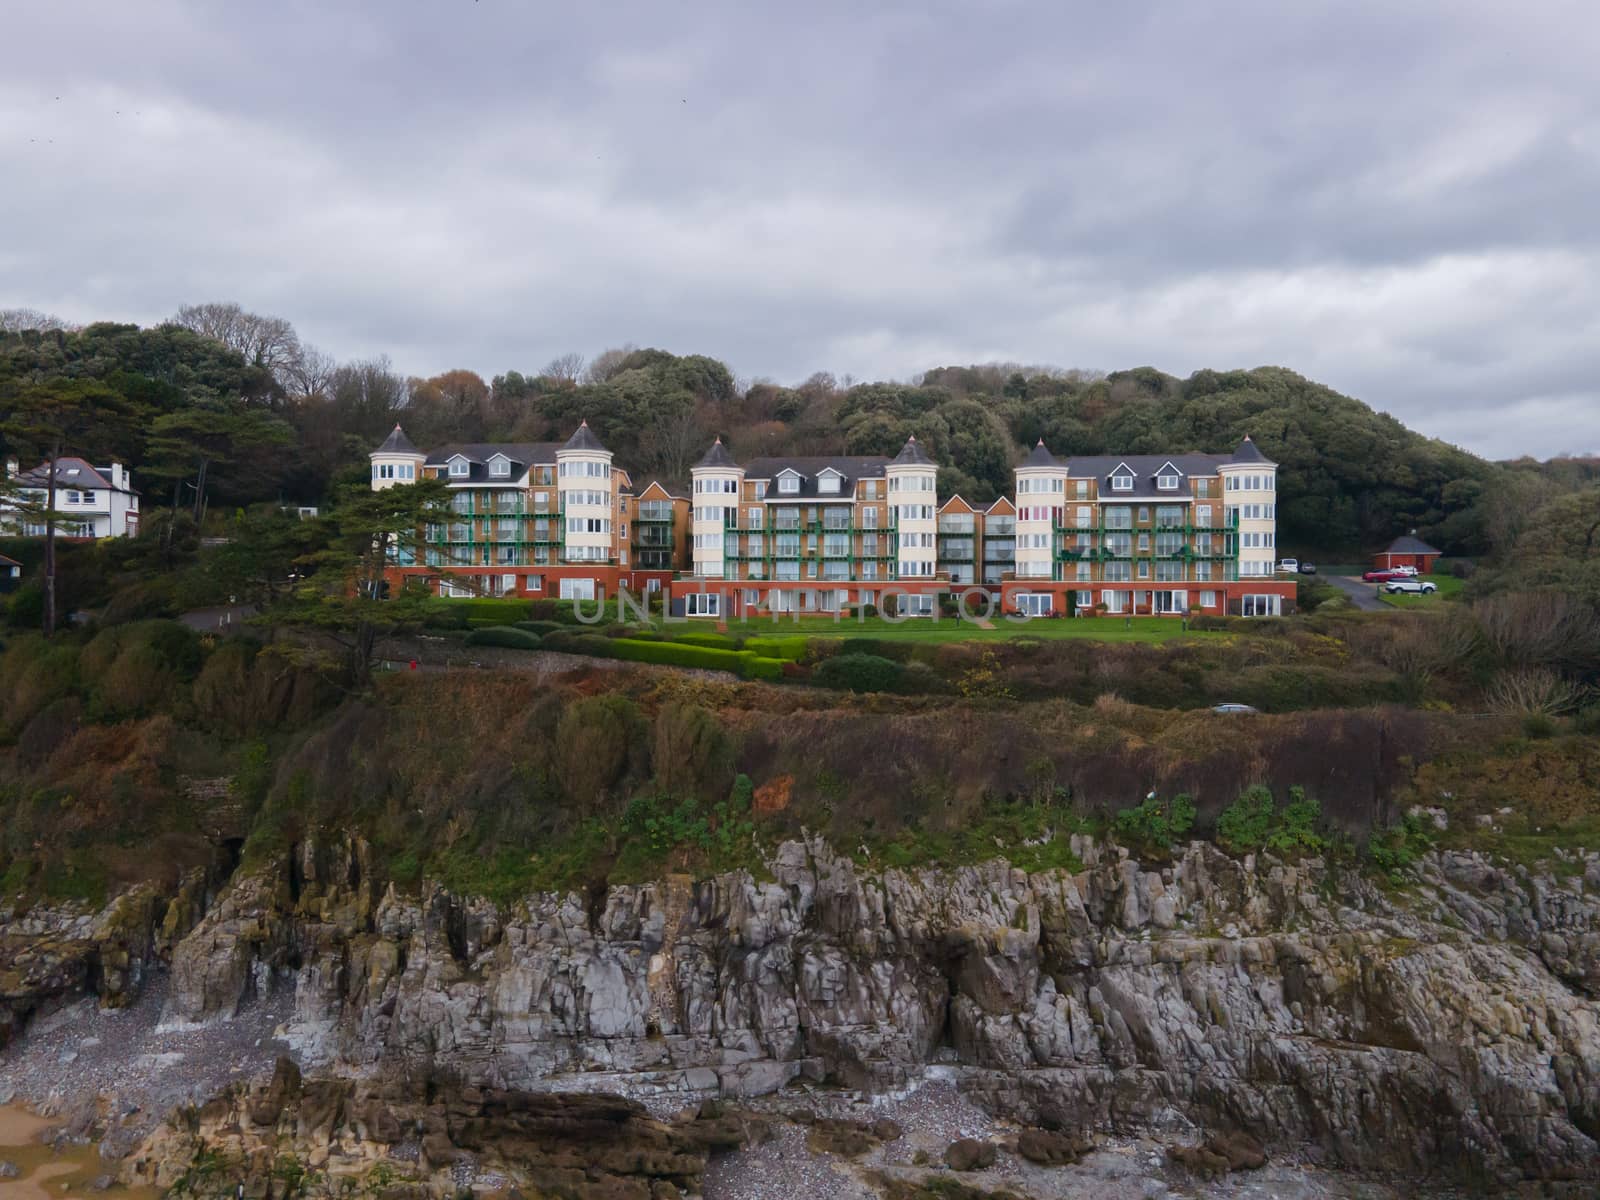 Luxury Apartments Sat Above The Cliffs Of Caswell Bay, Gower, Wales Uk. Stunning Coastal Views on a cloudy day.